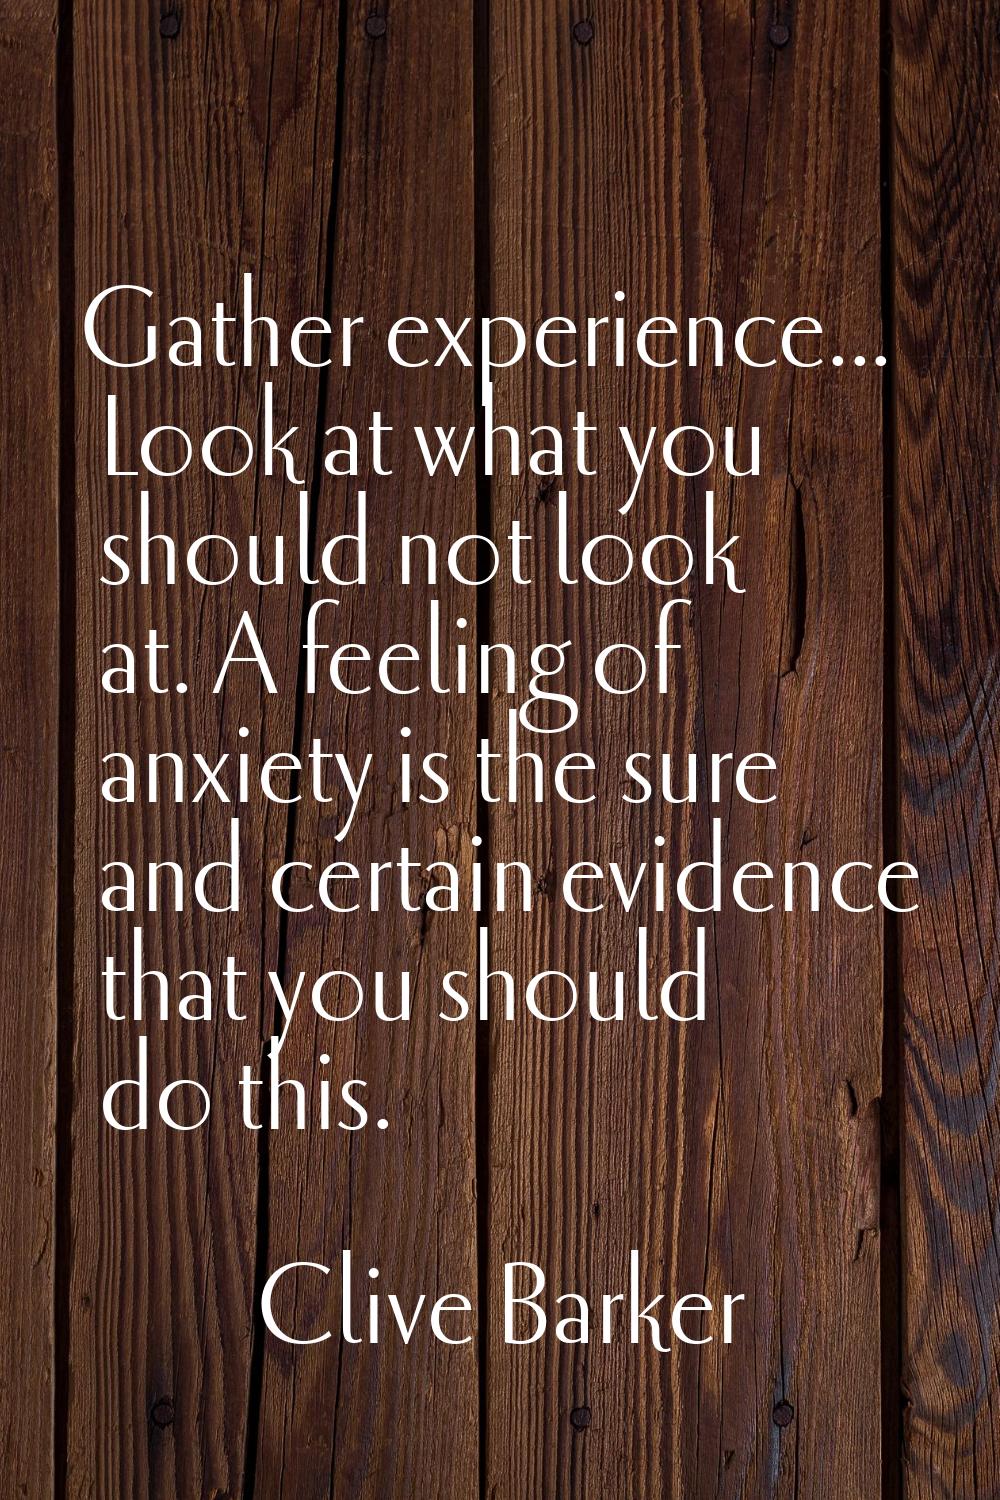 Gather experience... Look at what you should not look at. A feeling of anxiety is the sure and cert